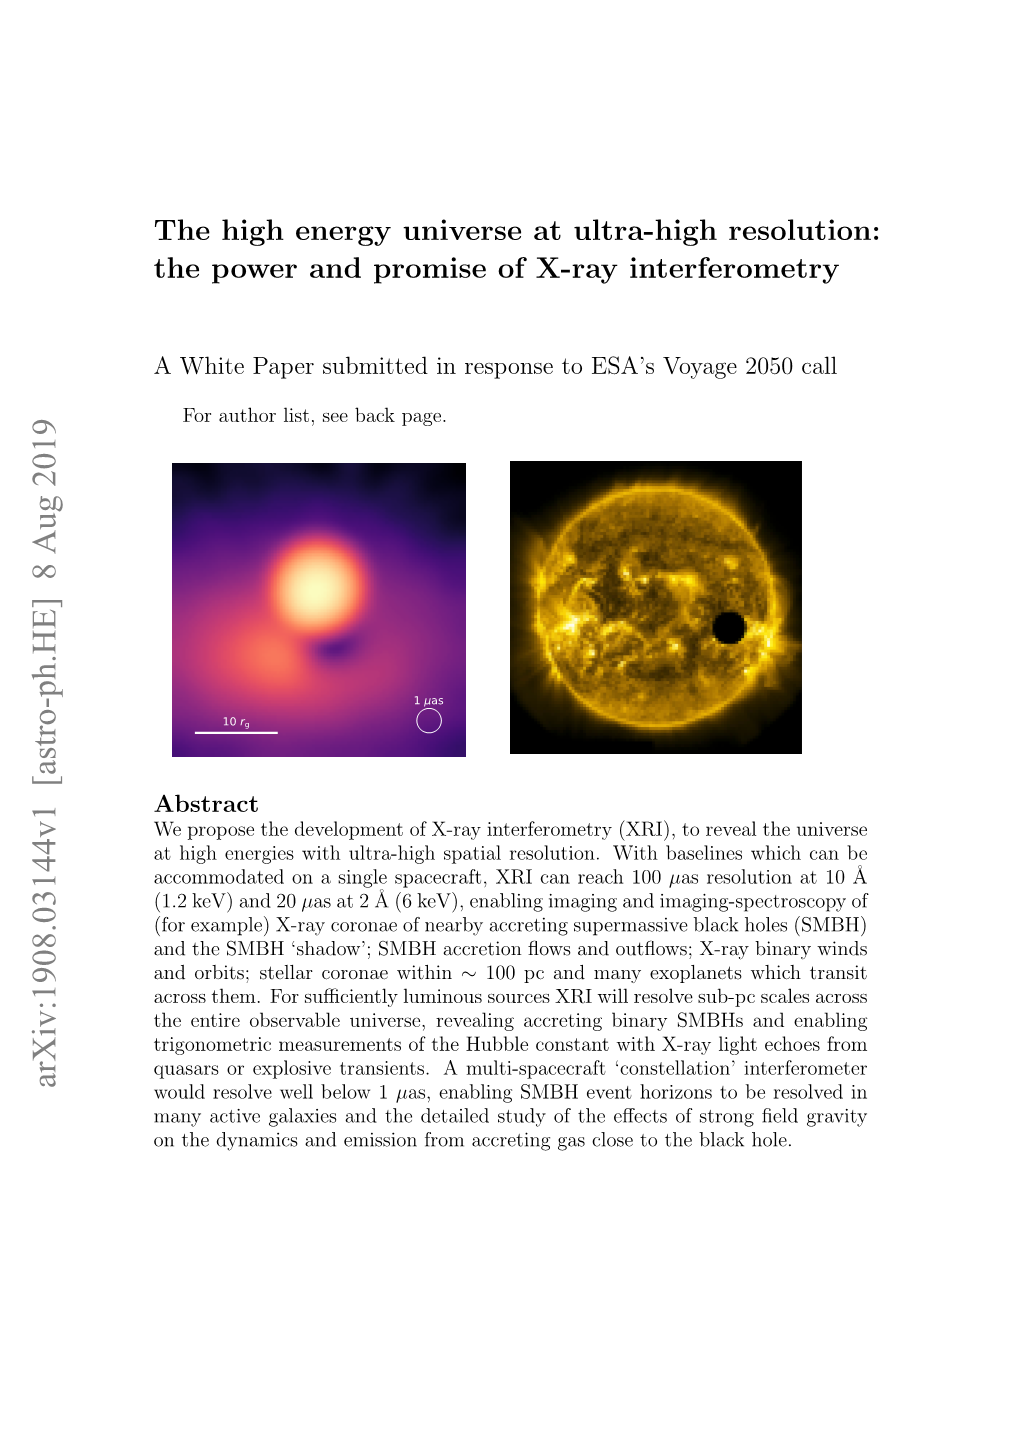 The High Energy Universe at Ultra-High Resolution: the Power and Promise of X-Ray Interferometry